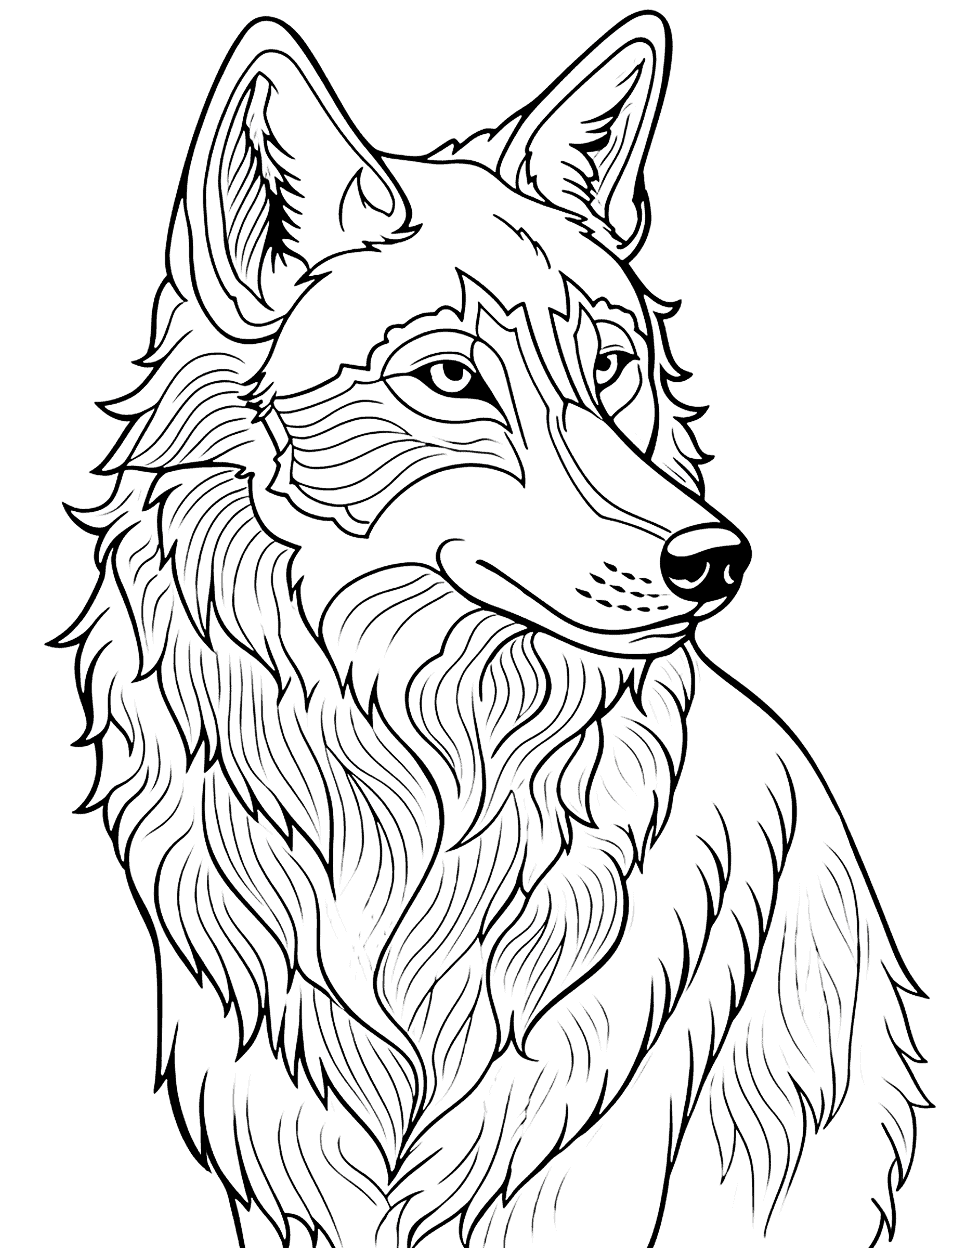 Mystical Wolf Spirit Coloring Page - A translucent wolf appearing as a guardian spirit.